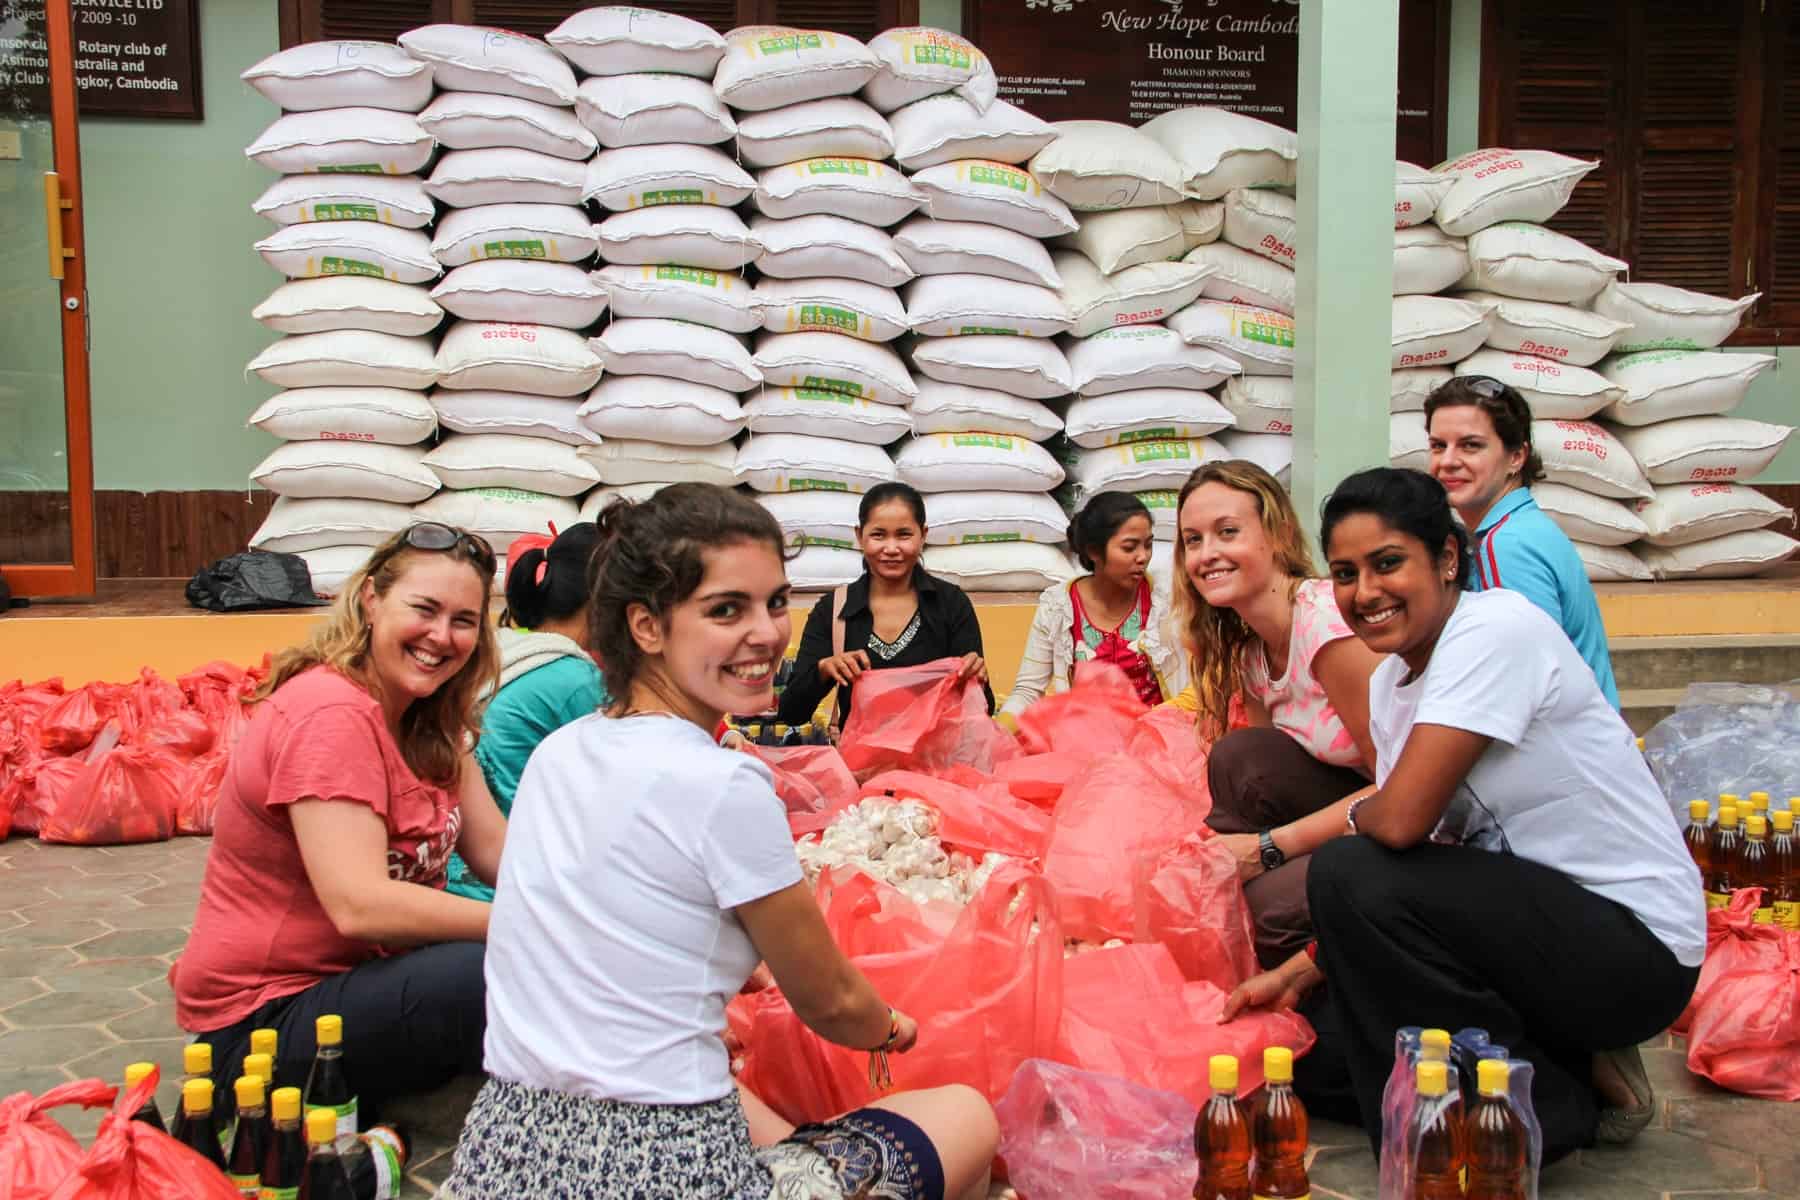 A group of women packing drinks bottles and other foods into red plastic bags. Behind them are piles of large bags of rice. 